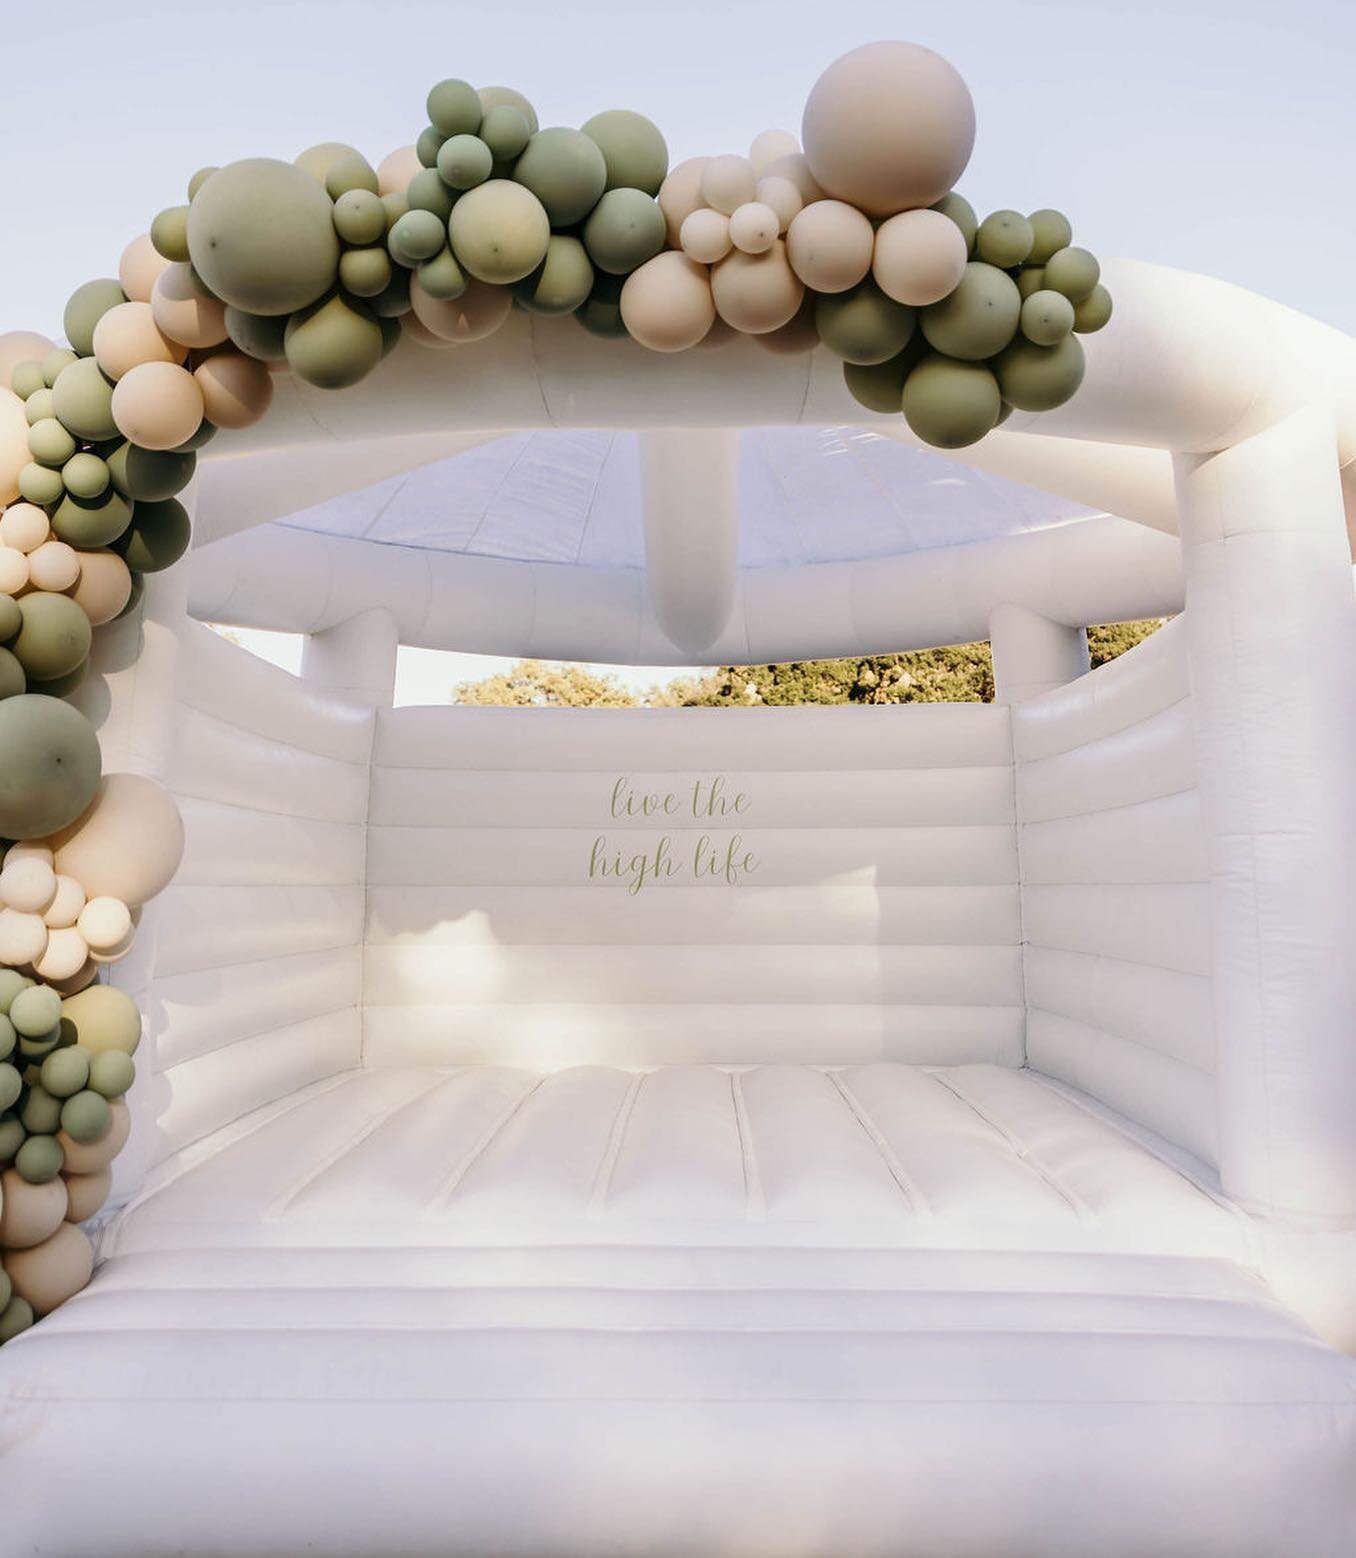 Live the high life with a bounce house and balloons at your wedding 😉

Bounce House | @sdbounceevents 
Balloons | @lola_mia_balloons 
Photography | @monica_hunt_photography 

#whitebouncehouse #whitebouncehousesandiego #modernbouncehouse #balloonssa